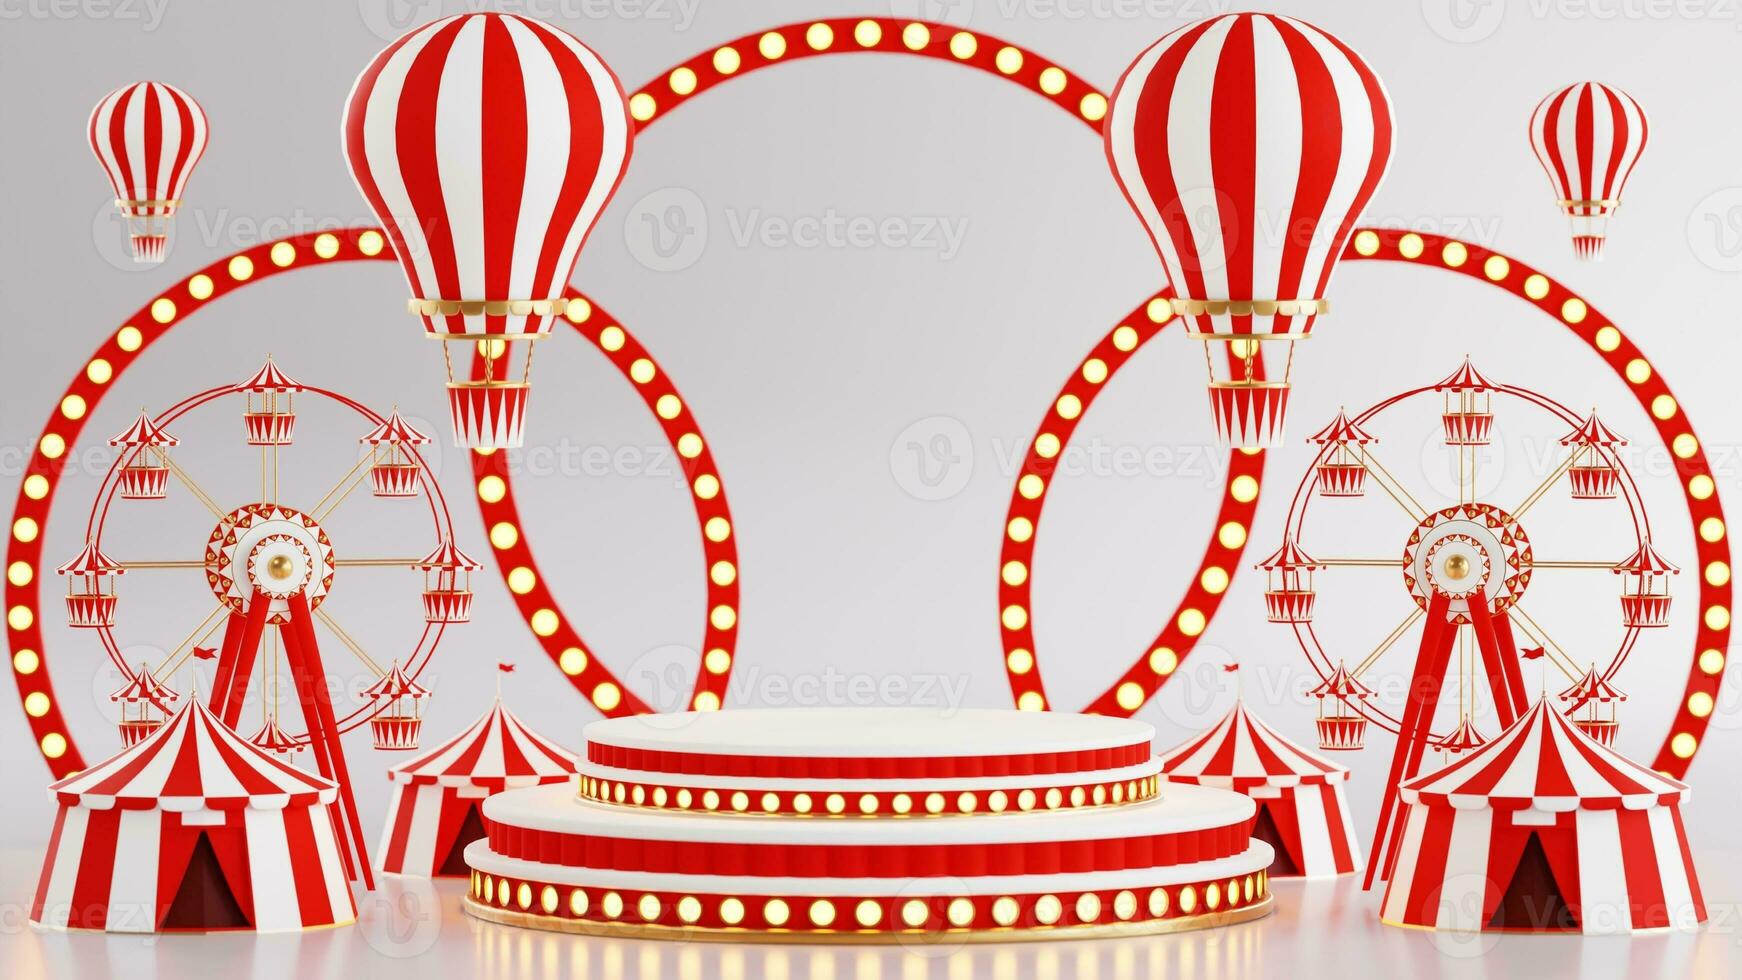 3D rendering for amusement park, circus, carnival fair theme podium with many rides and shops circus tent 3d illustration photo